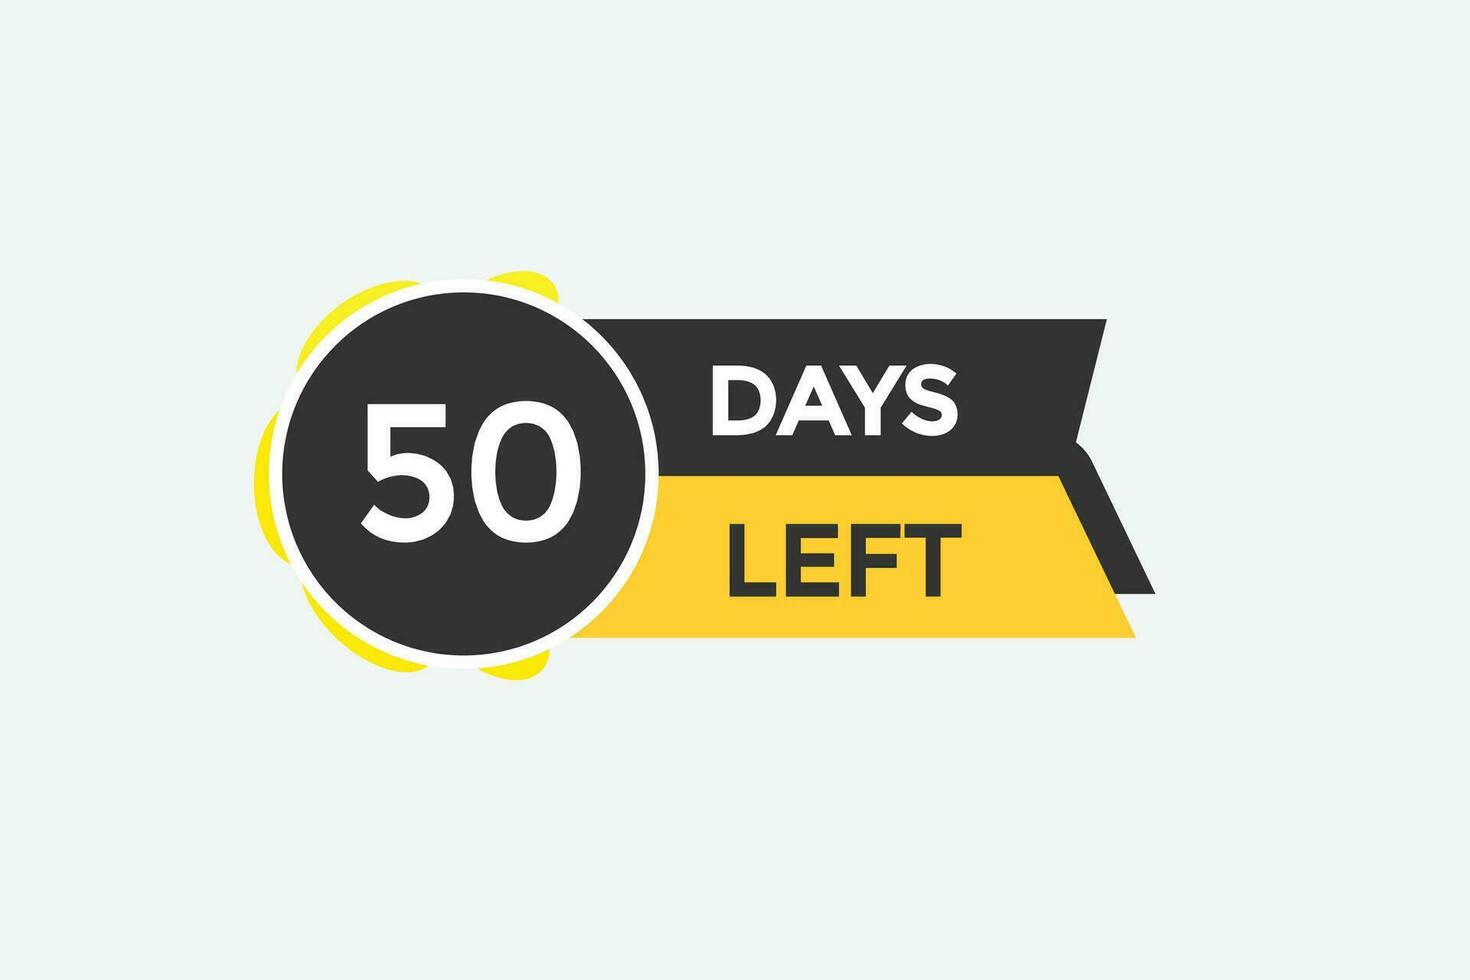 50 days, left countdown to go one time template,50  day countdown left banner label button vector